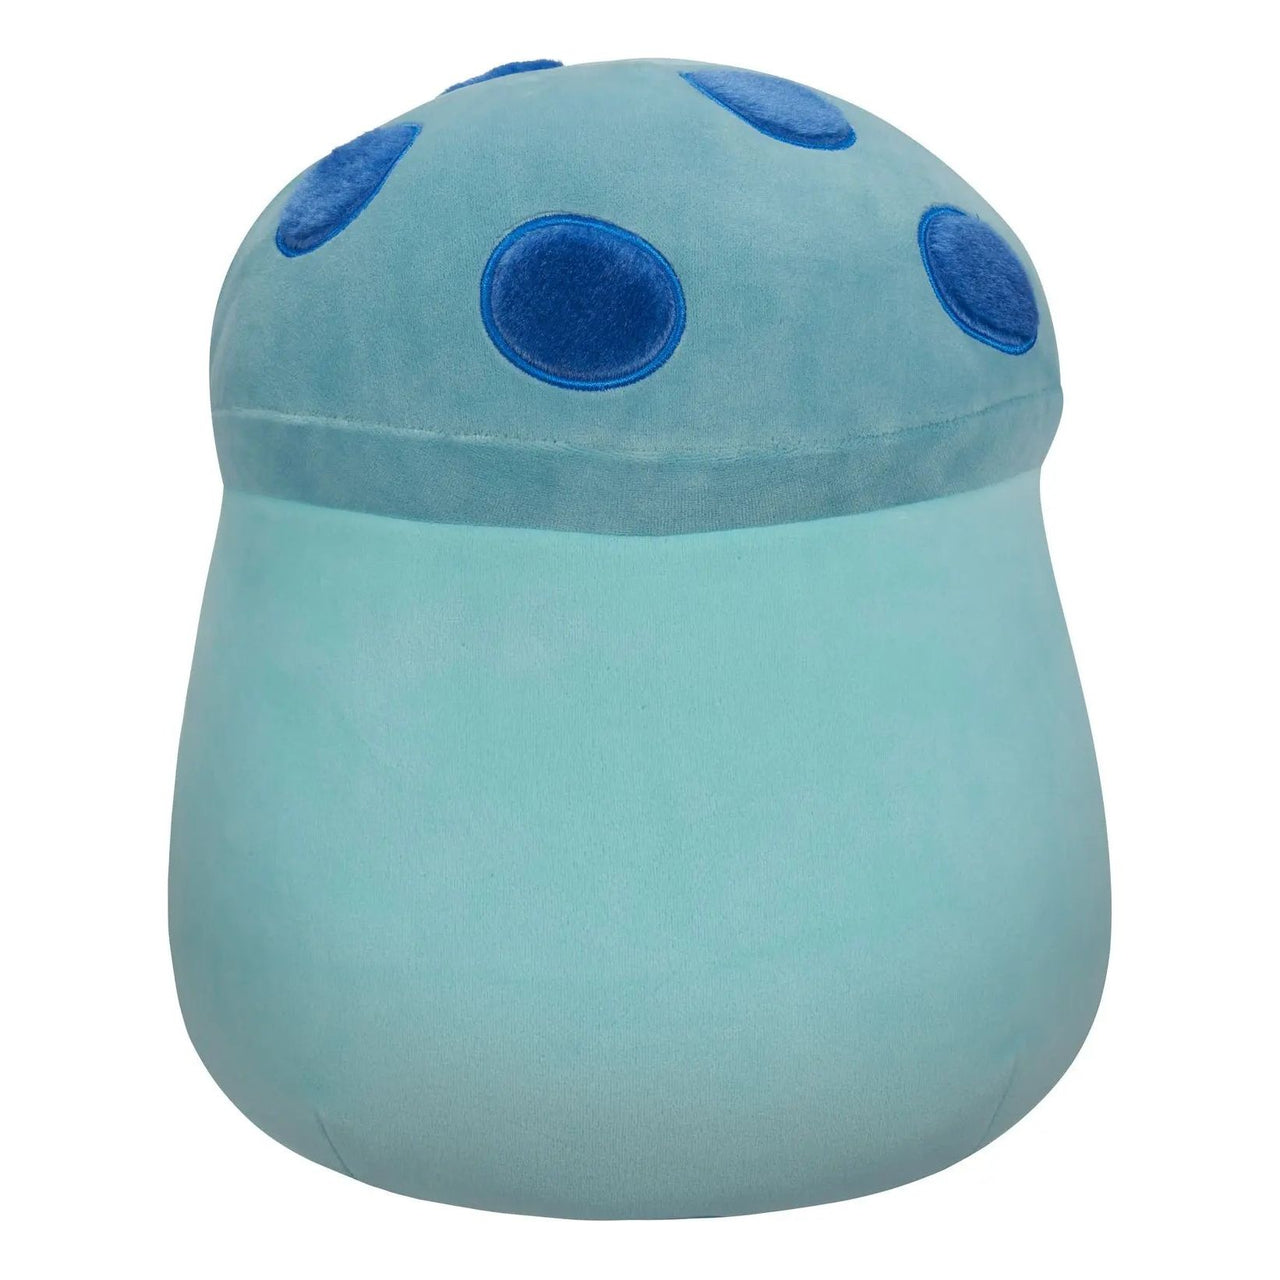 Squishmallows 12" Ankur the Teal Mushroom with Blue Fuzzy Spots Plush Squishmallows